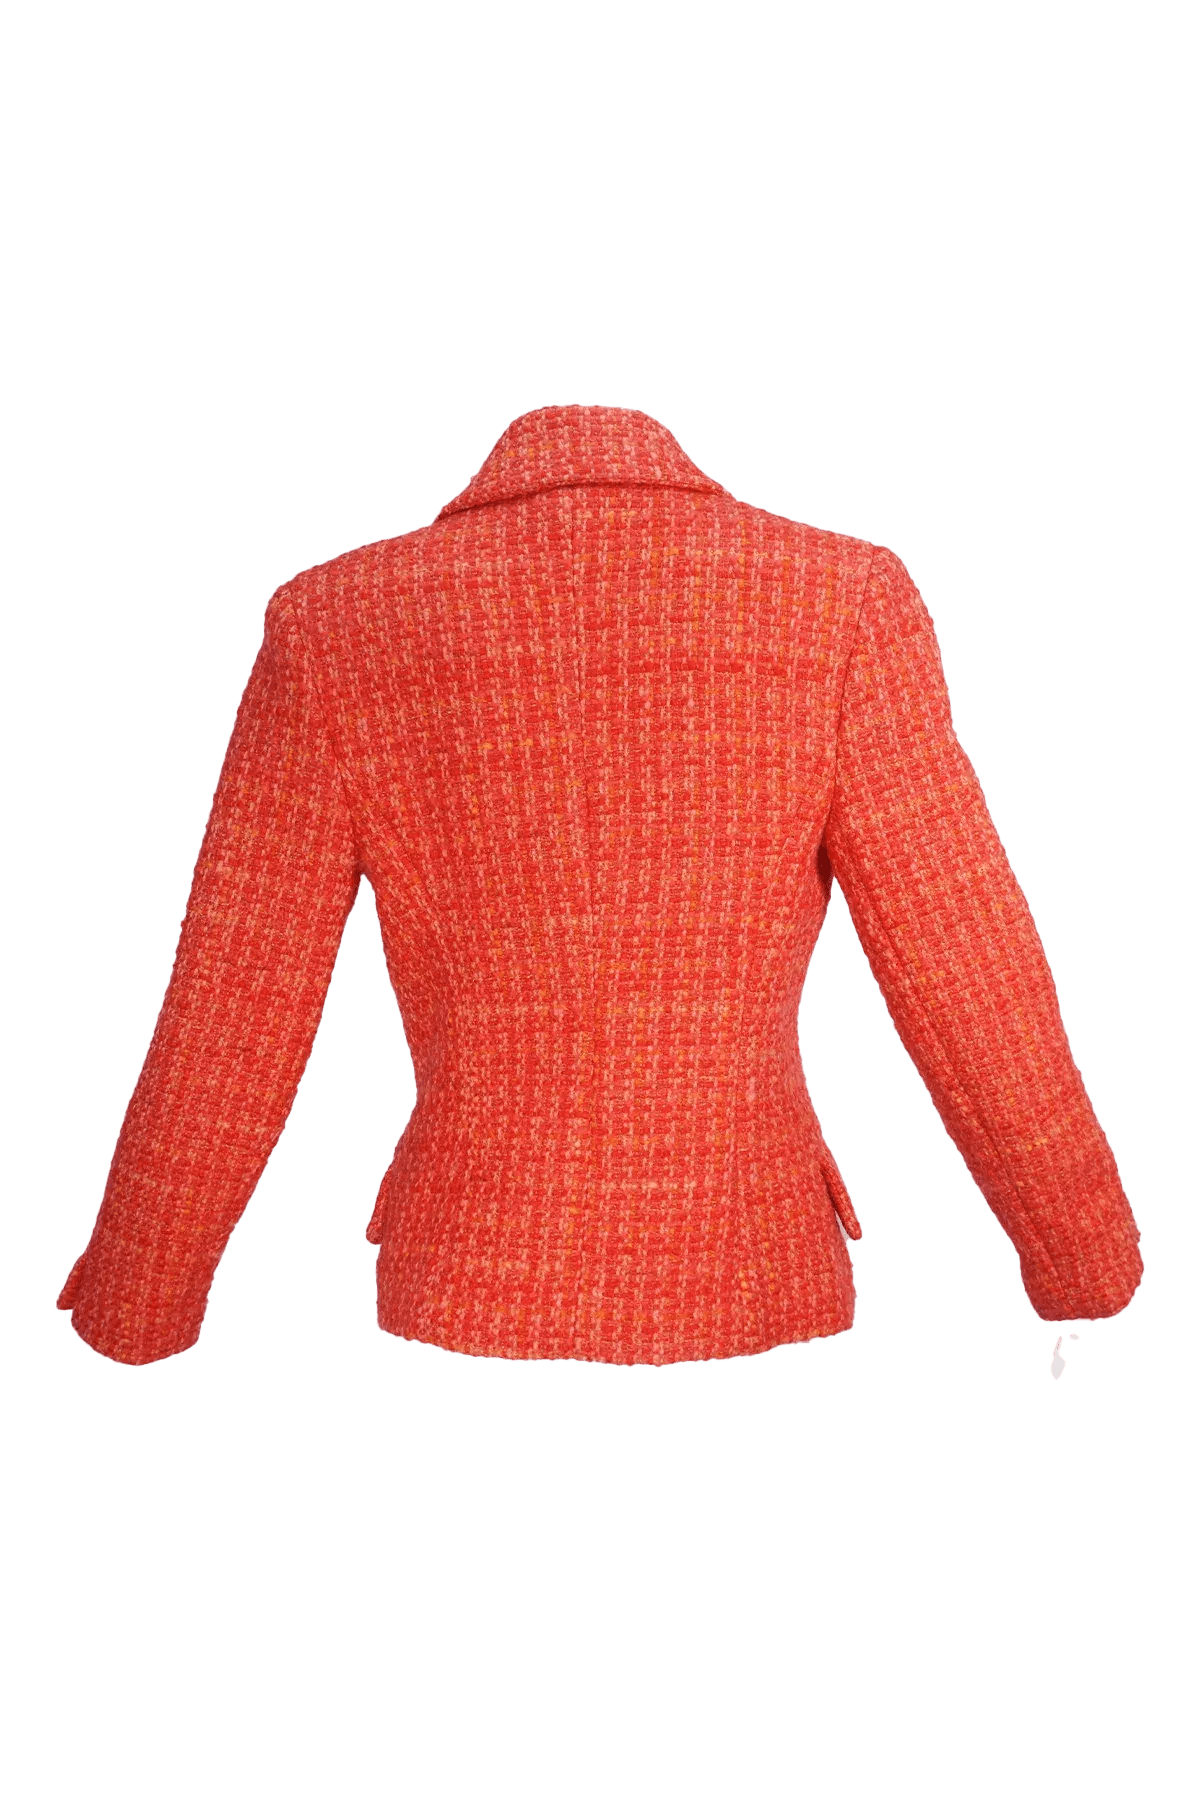 Chanel Size 42 Red Orange Tweed Jacket CC Buttons